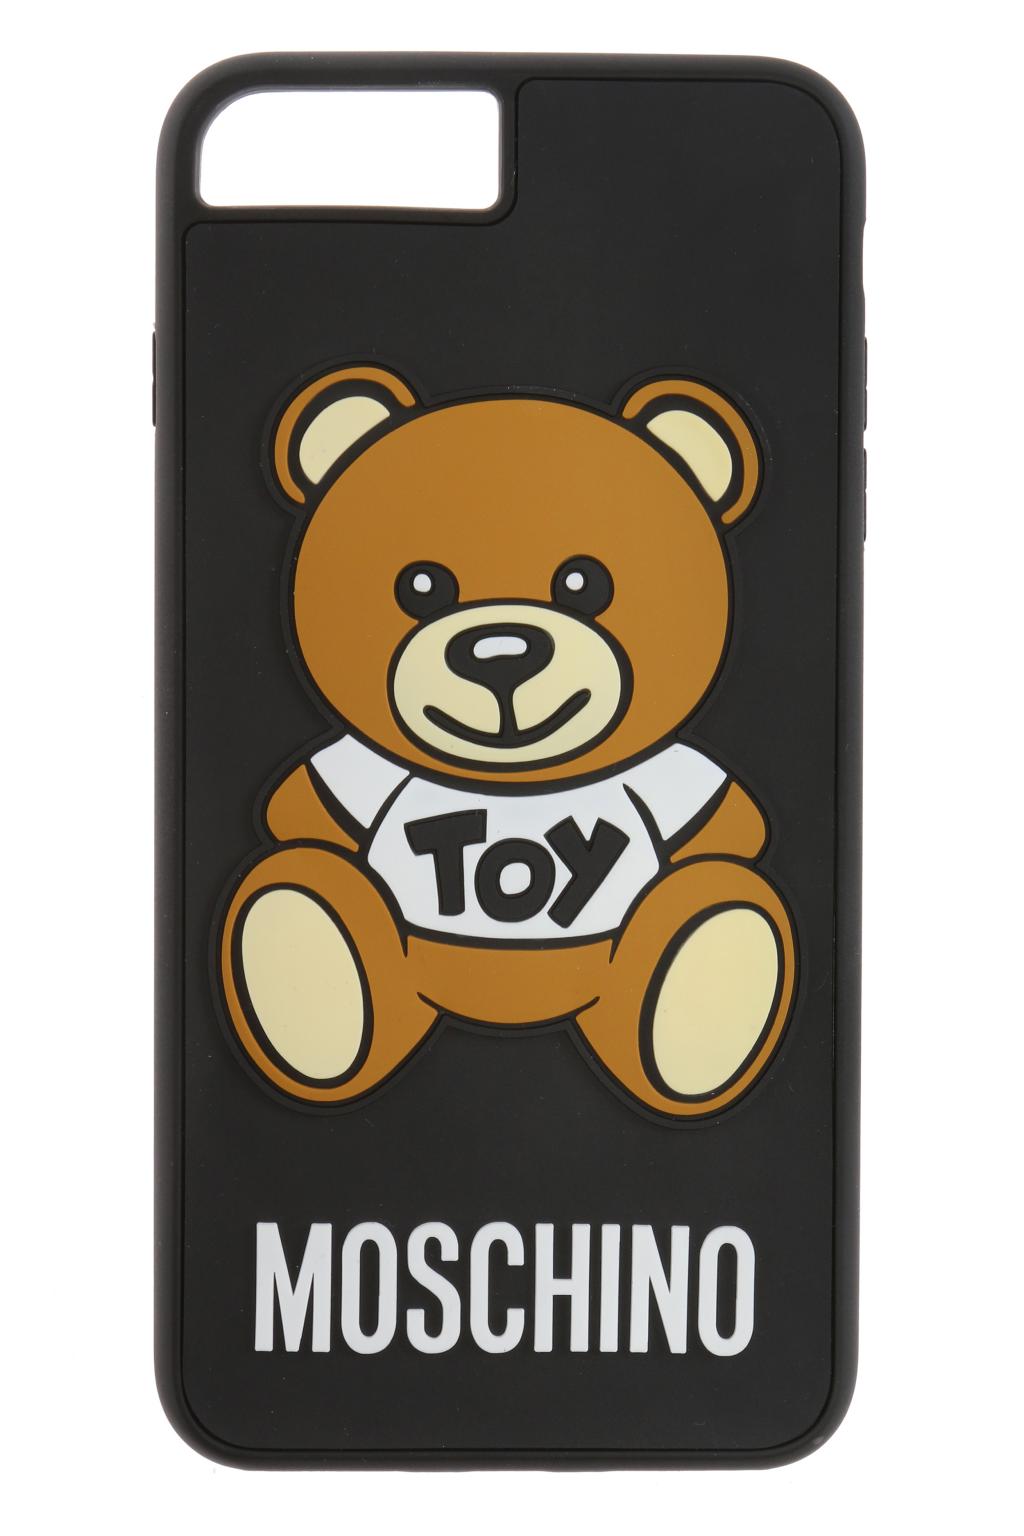 moschino mouse trap phone case